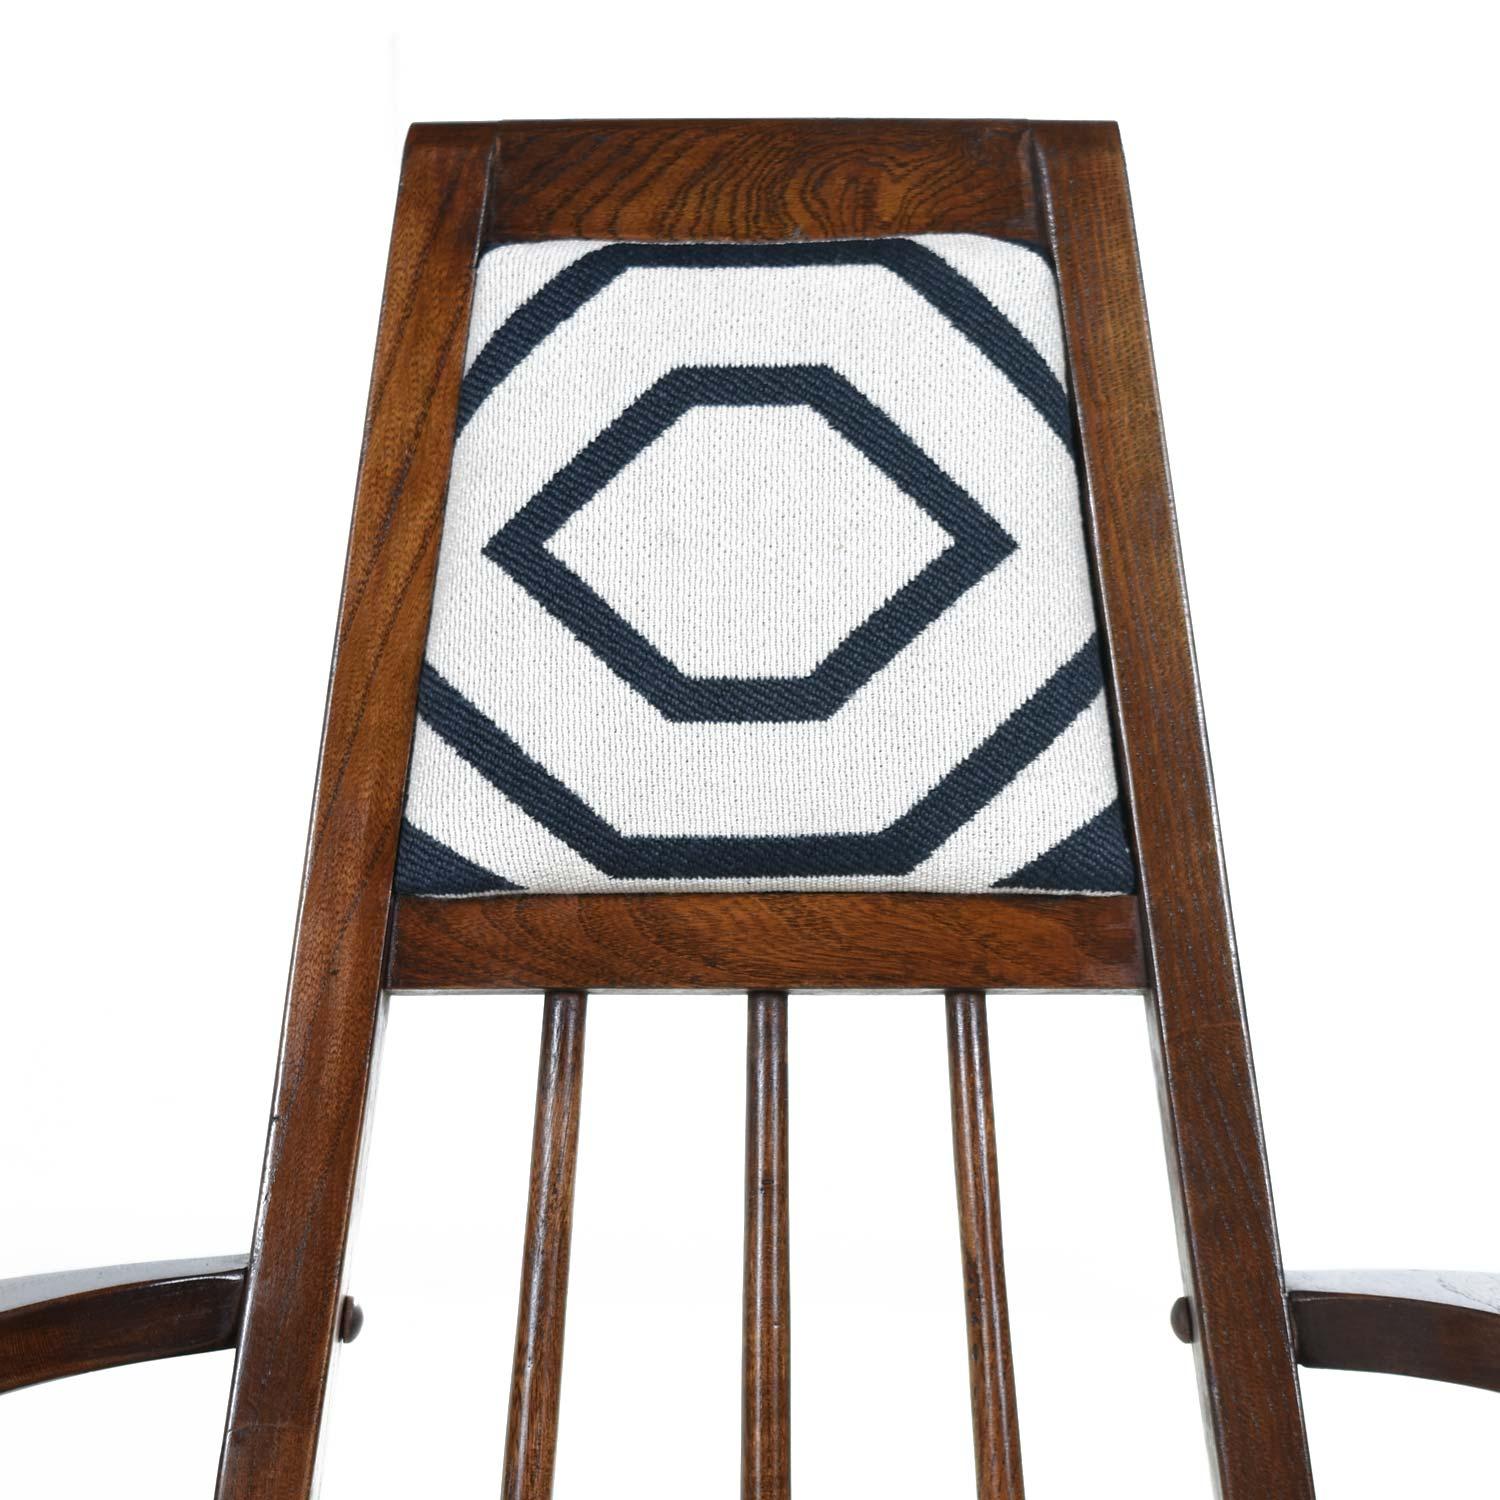 Mid-20th Century Solid Walnut Mid-Century Modern Chairs in Navy and Ivory Fabric